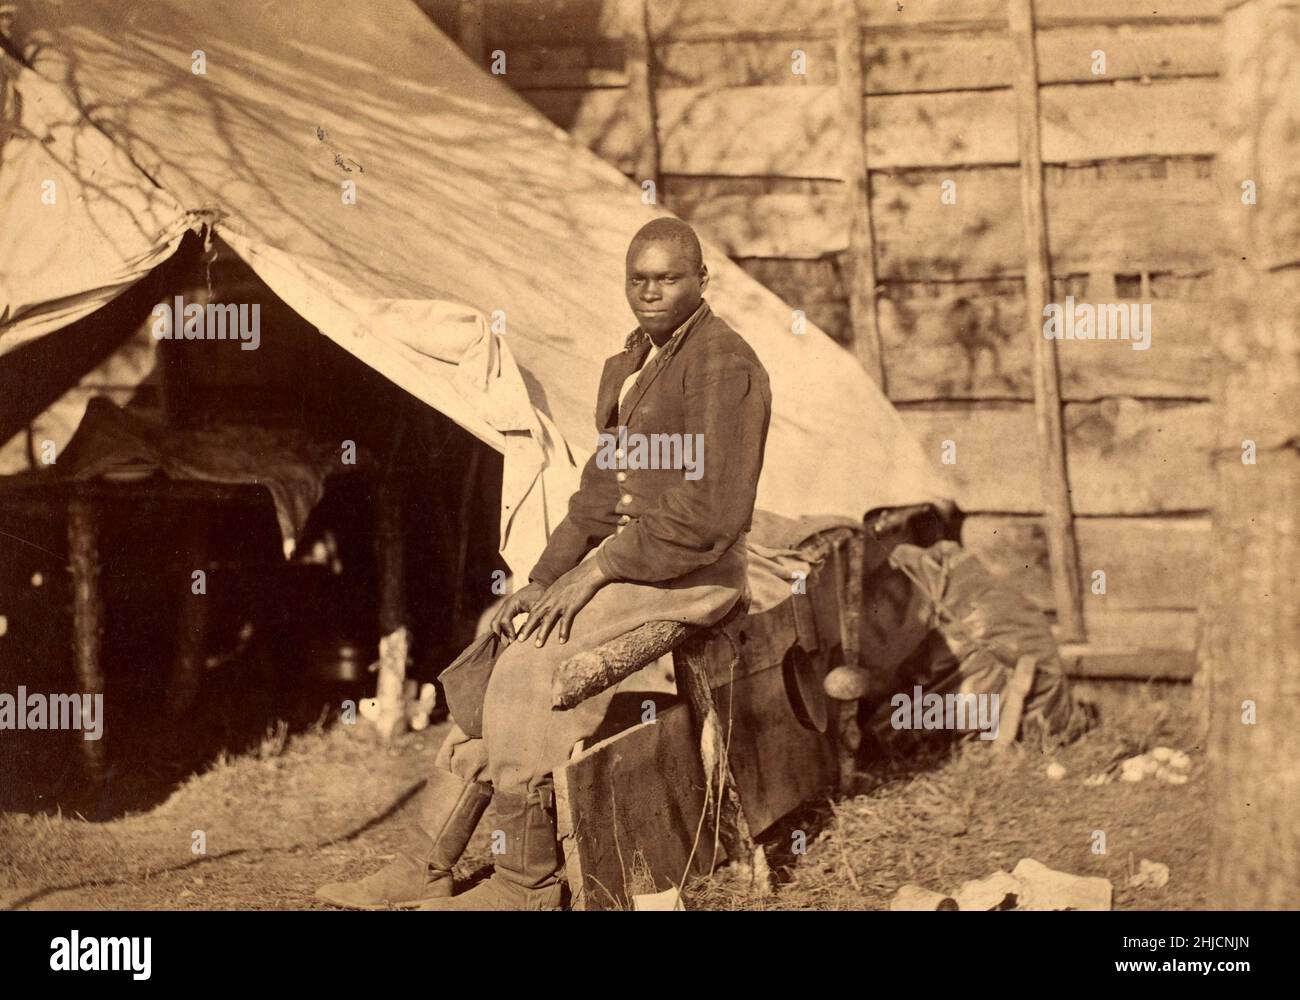 Black Soldier in Camp, American Civil War, circa 1863. Photo possibly by Alexander Gardner. Stock Photo